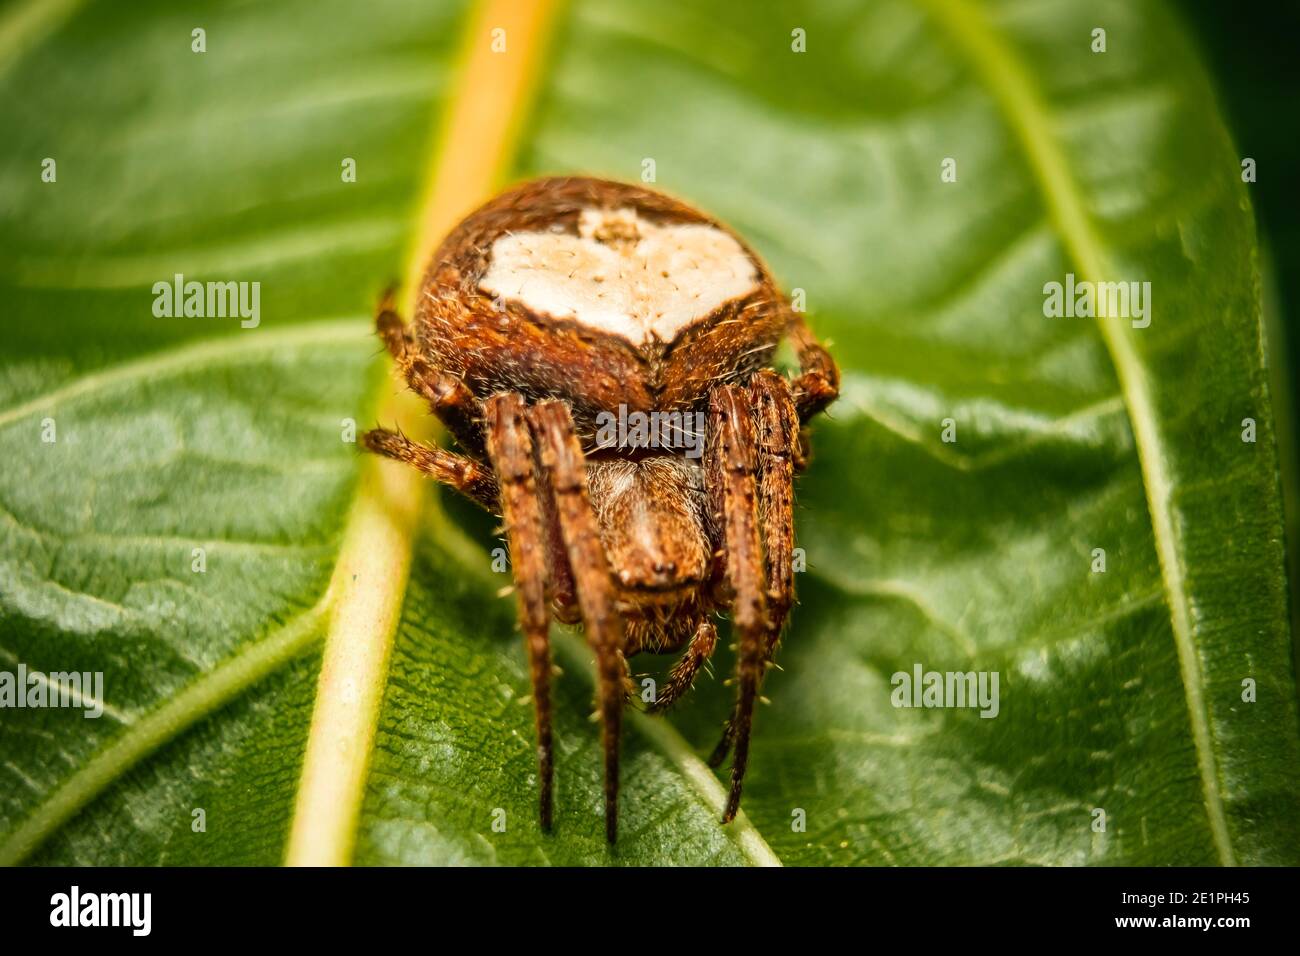 Macro Stock Image - Jumping spider on leaf extreme close up. Macro photo of jumper Spider on green leaf isolated green background. Stock Photo